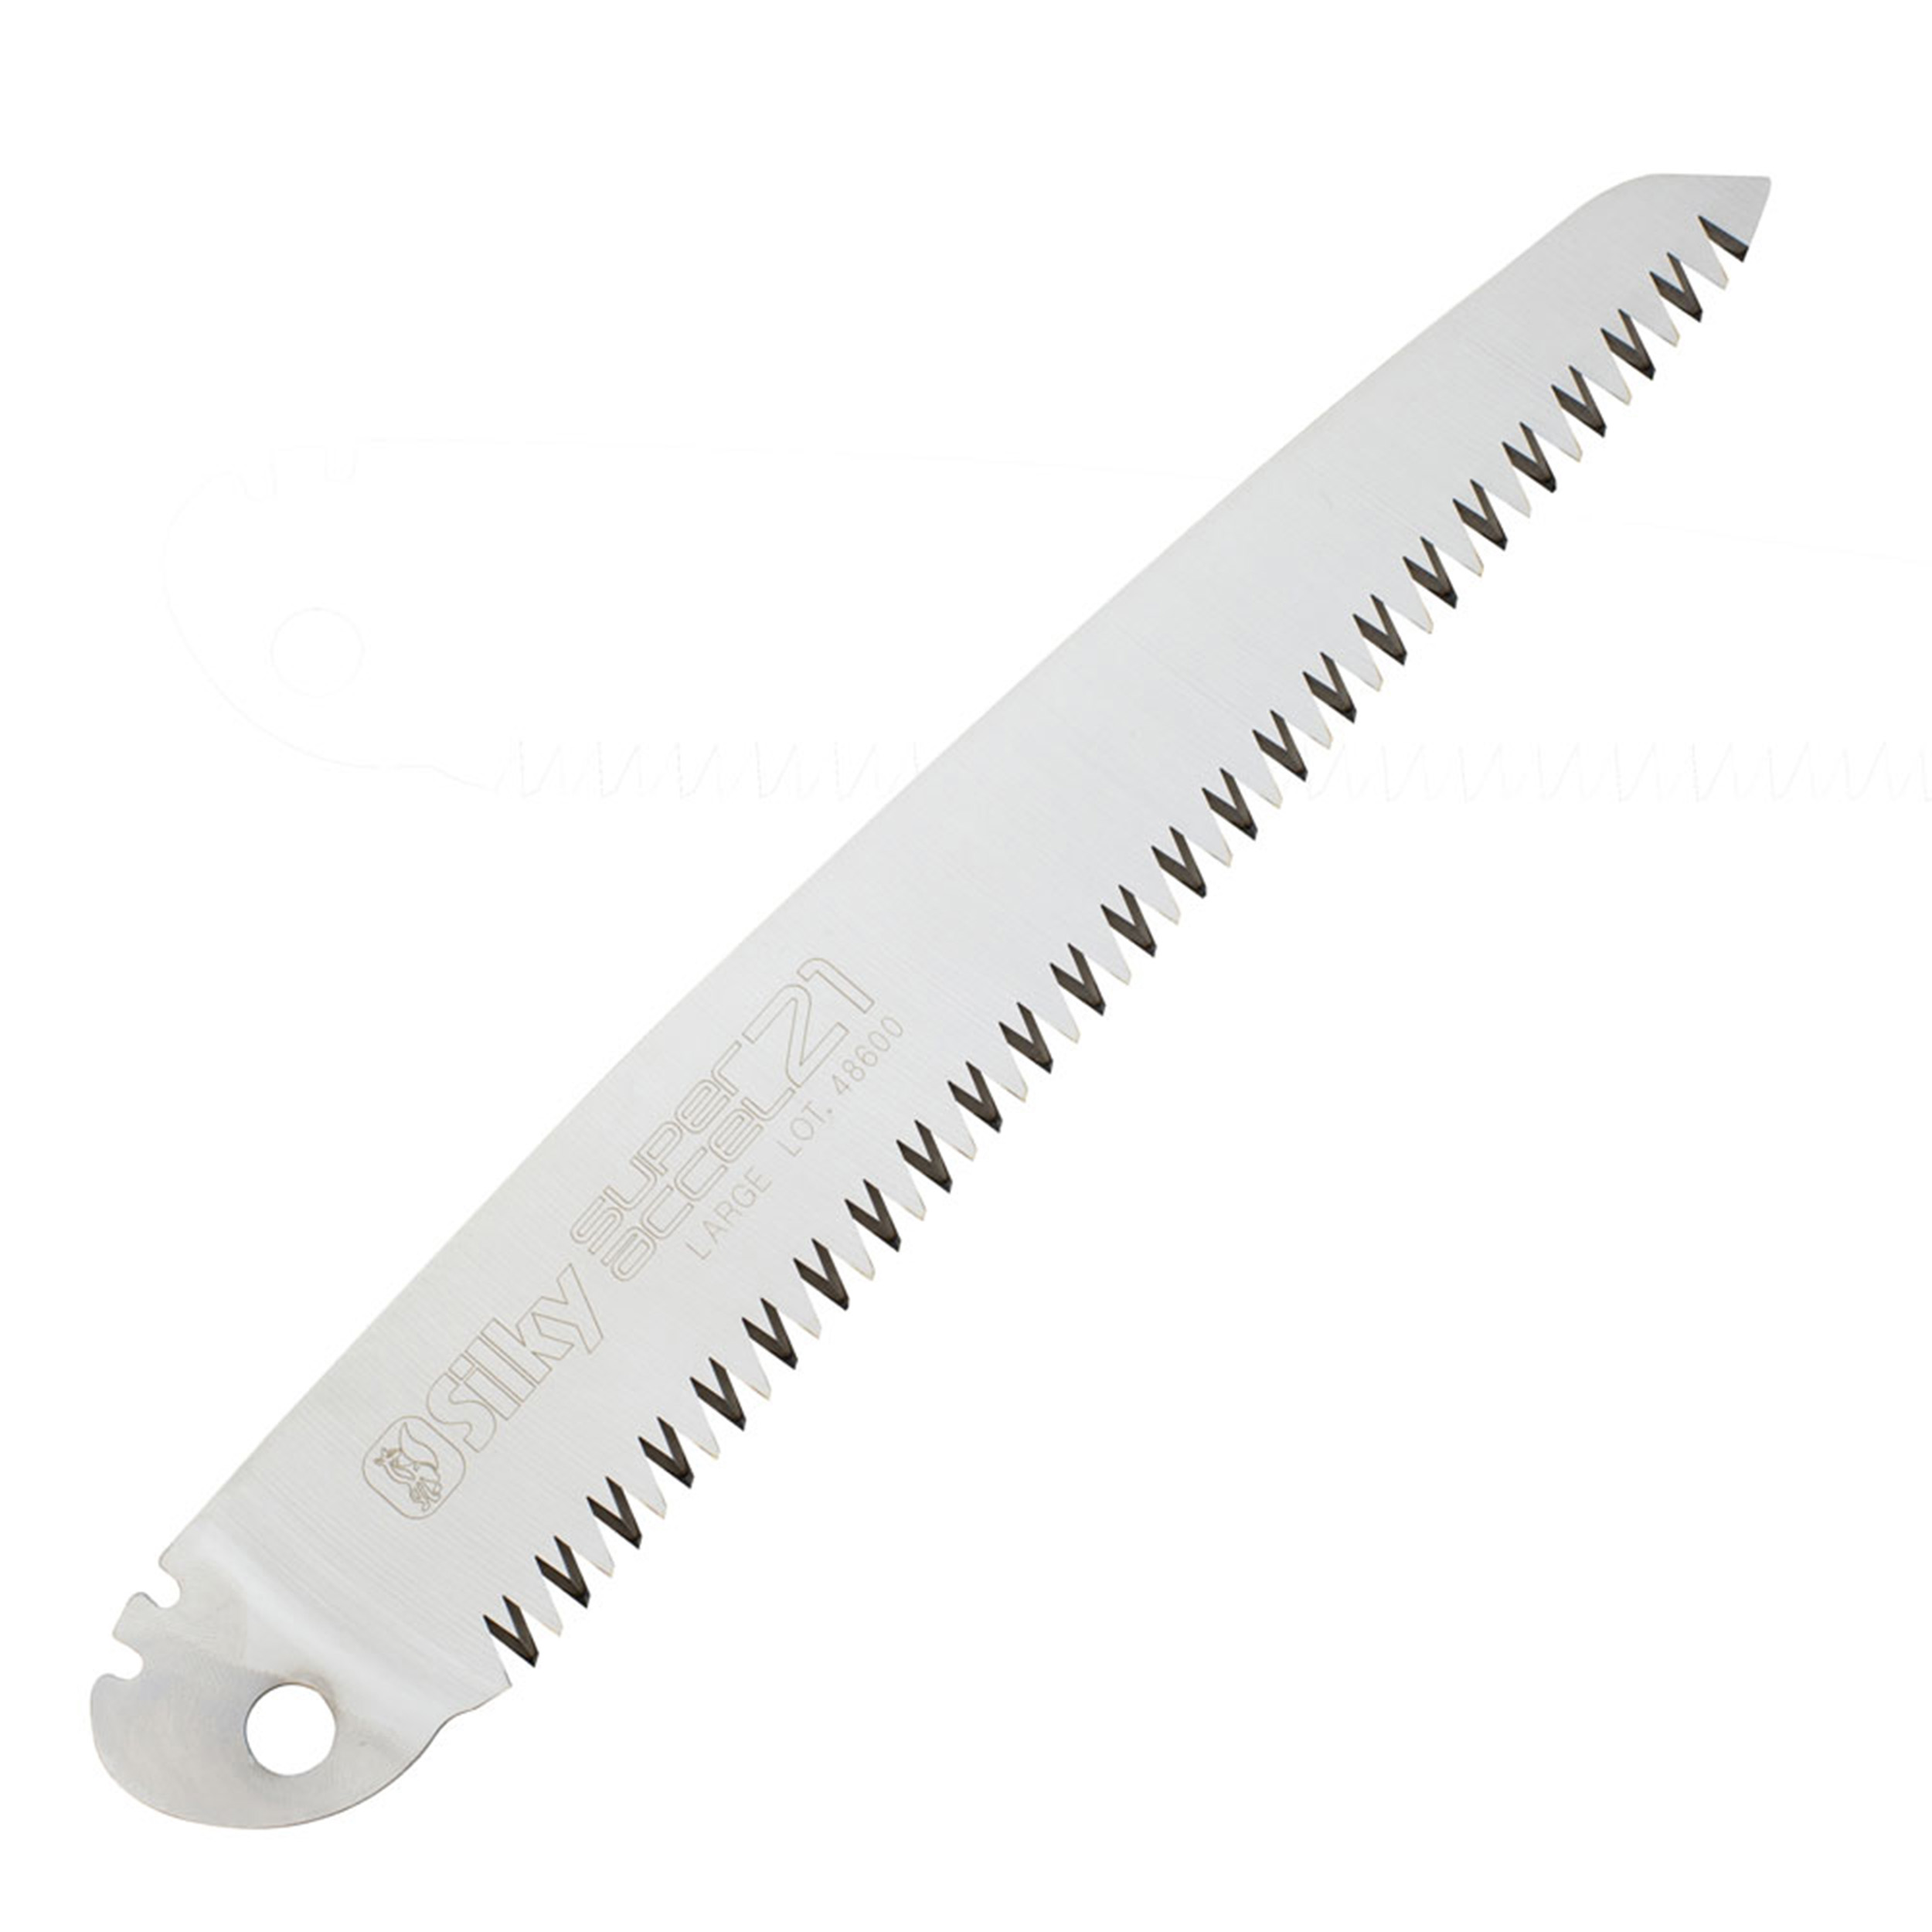 Superaccel 21 Replacement Blade, 210mm, Large Teeth